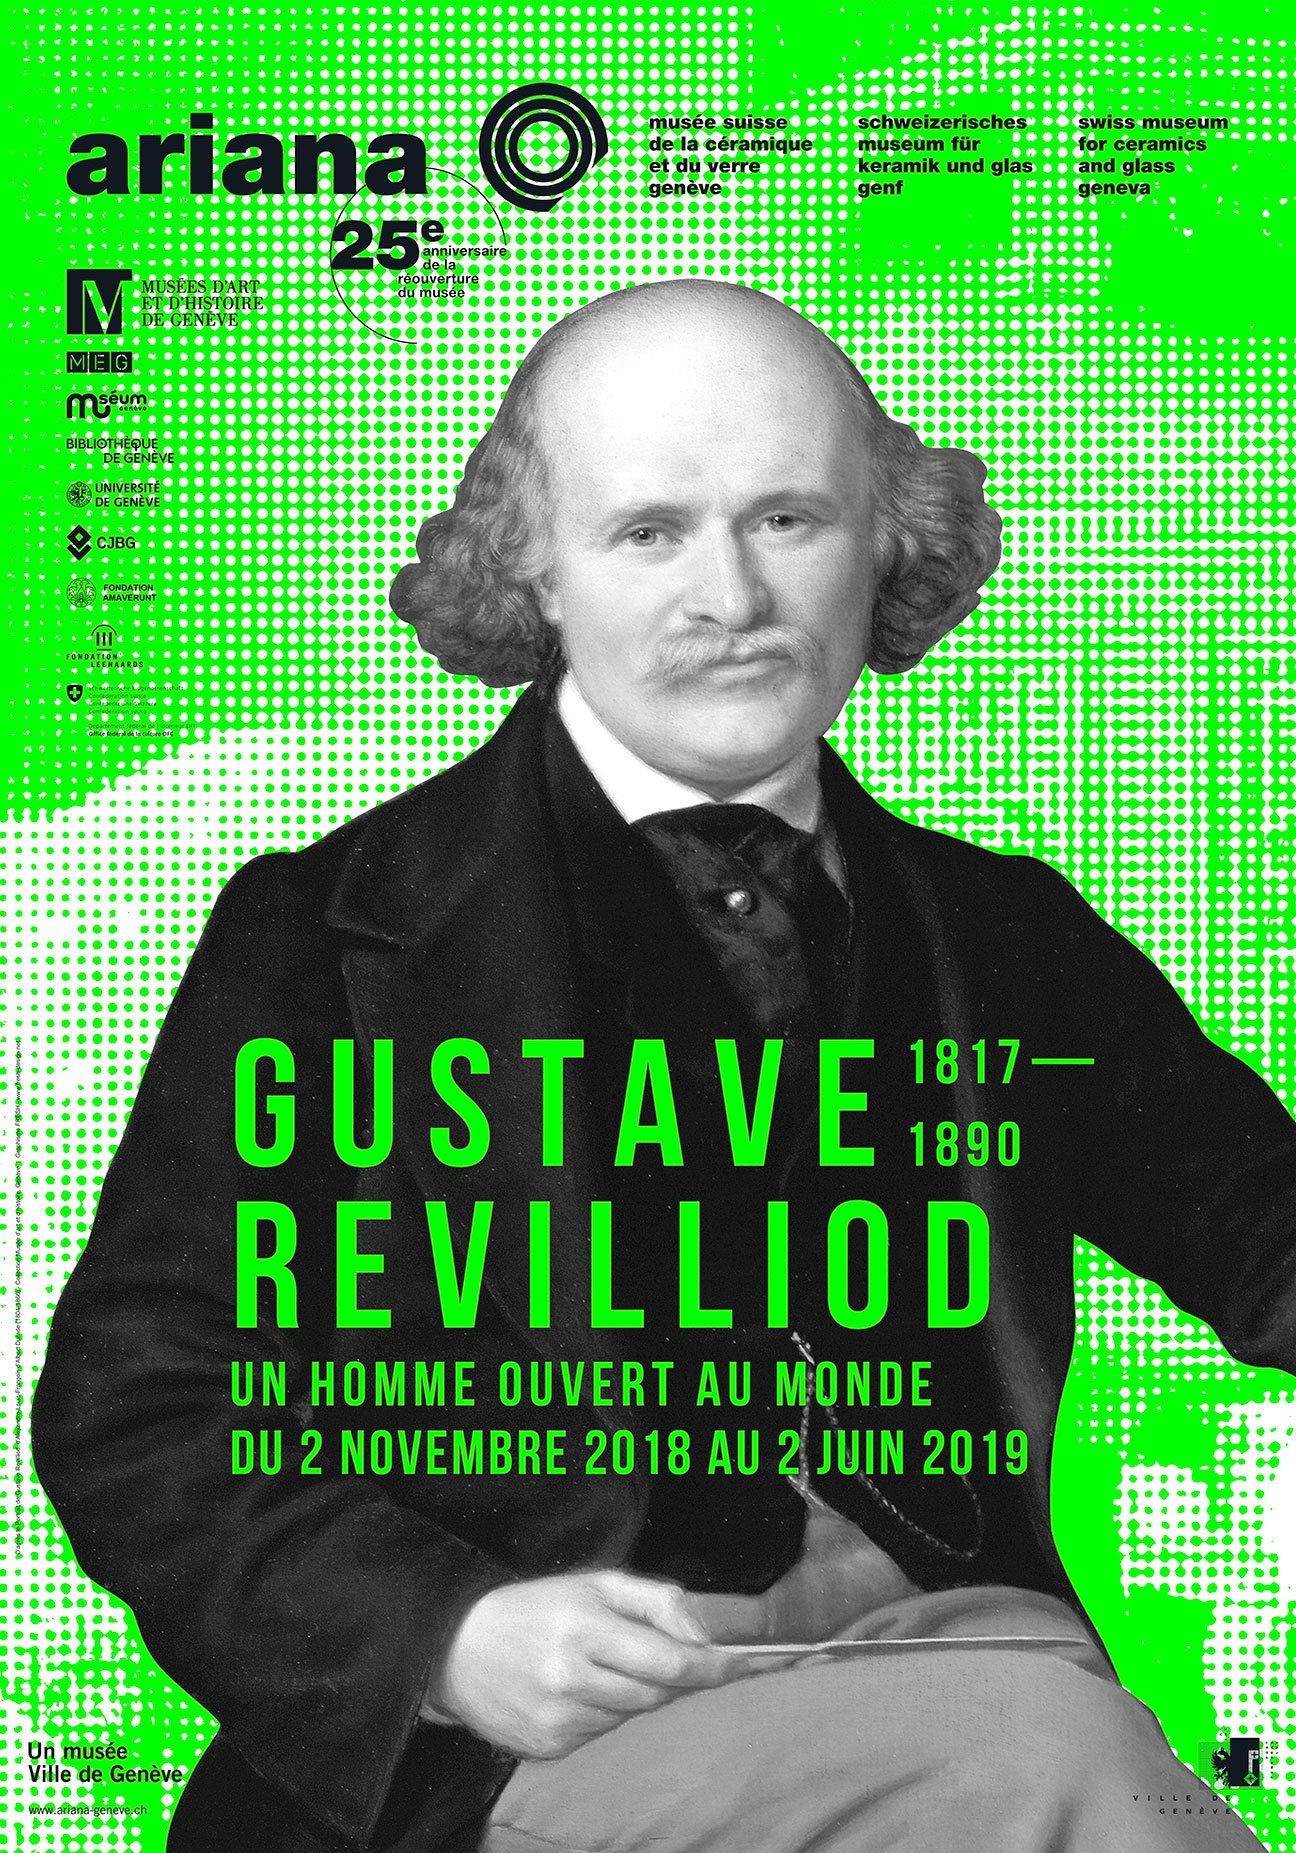 fabiencuffel-exposition-revilliod-musee-ariana-geneve-affiche